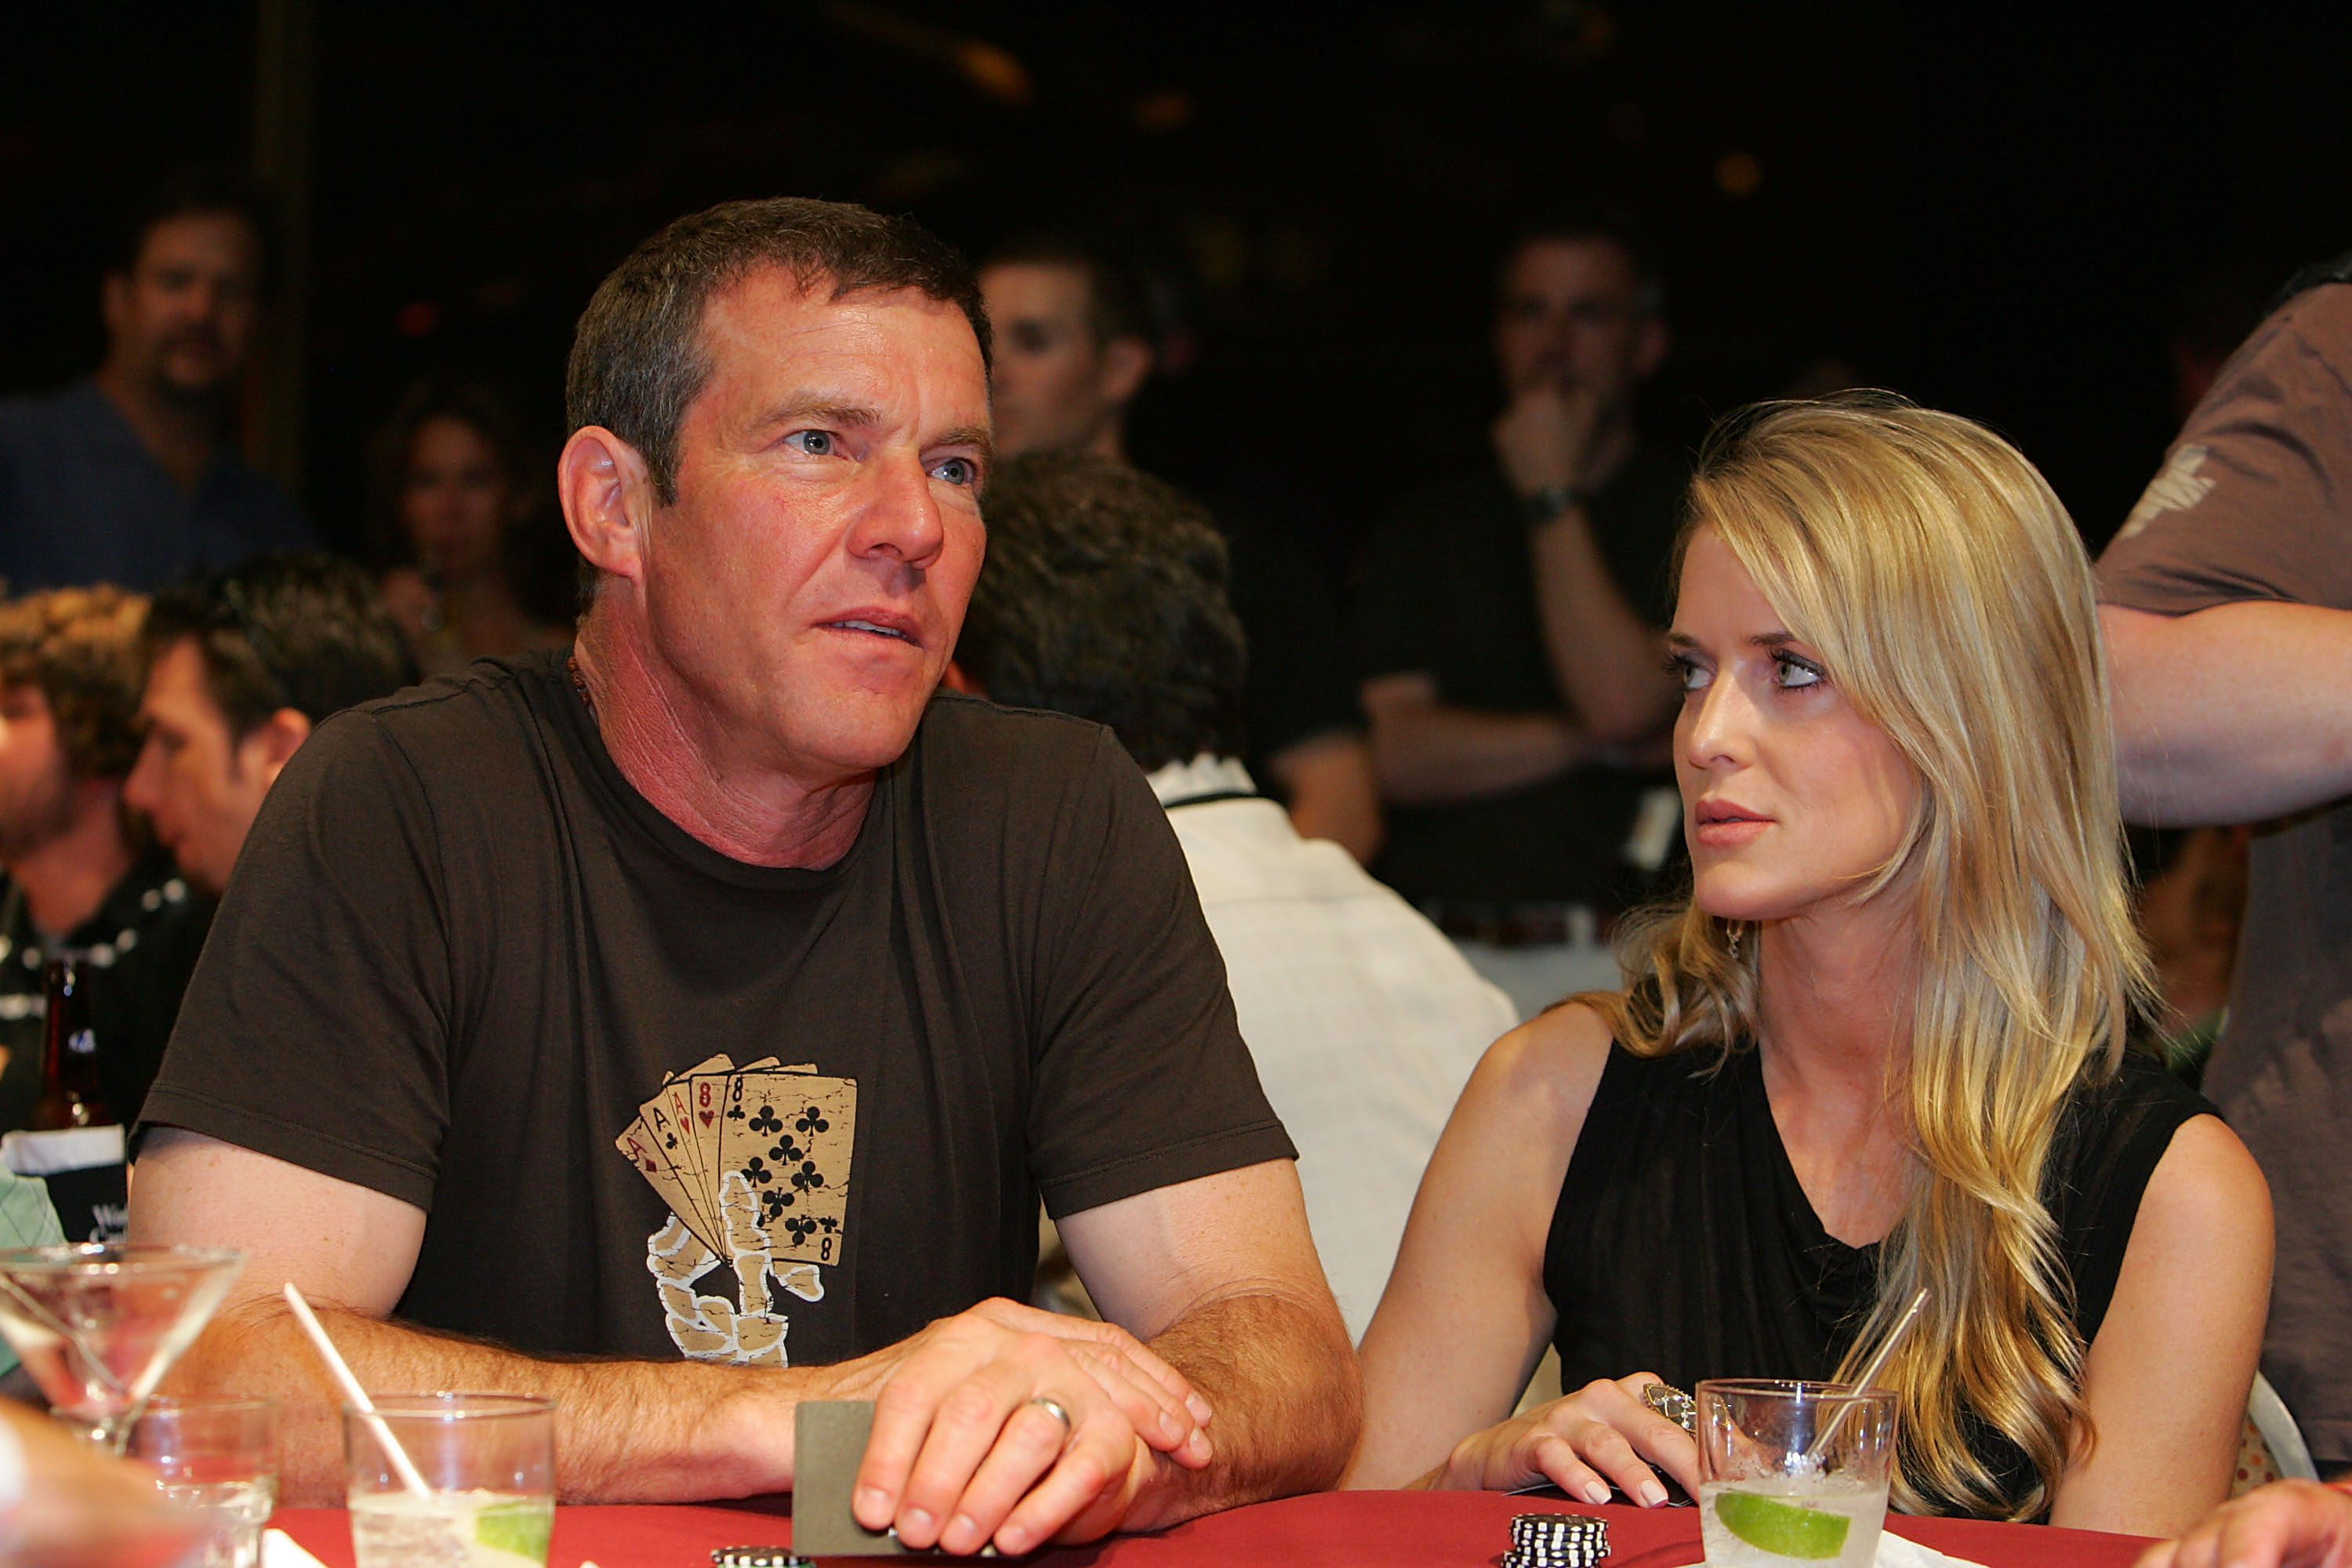 Dennis Quaid and Kimberly Buffington attend a charity event on June 7, 2007 | Source: Getty Images